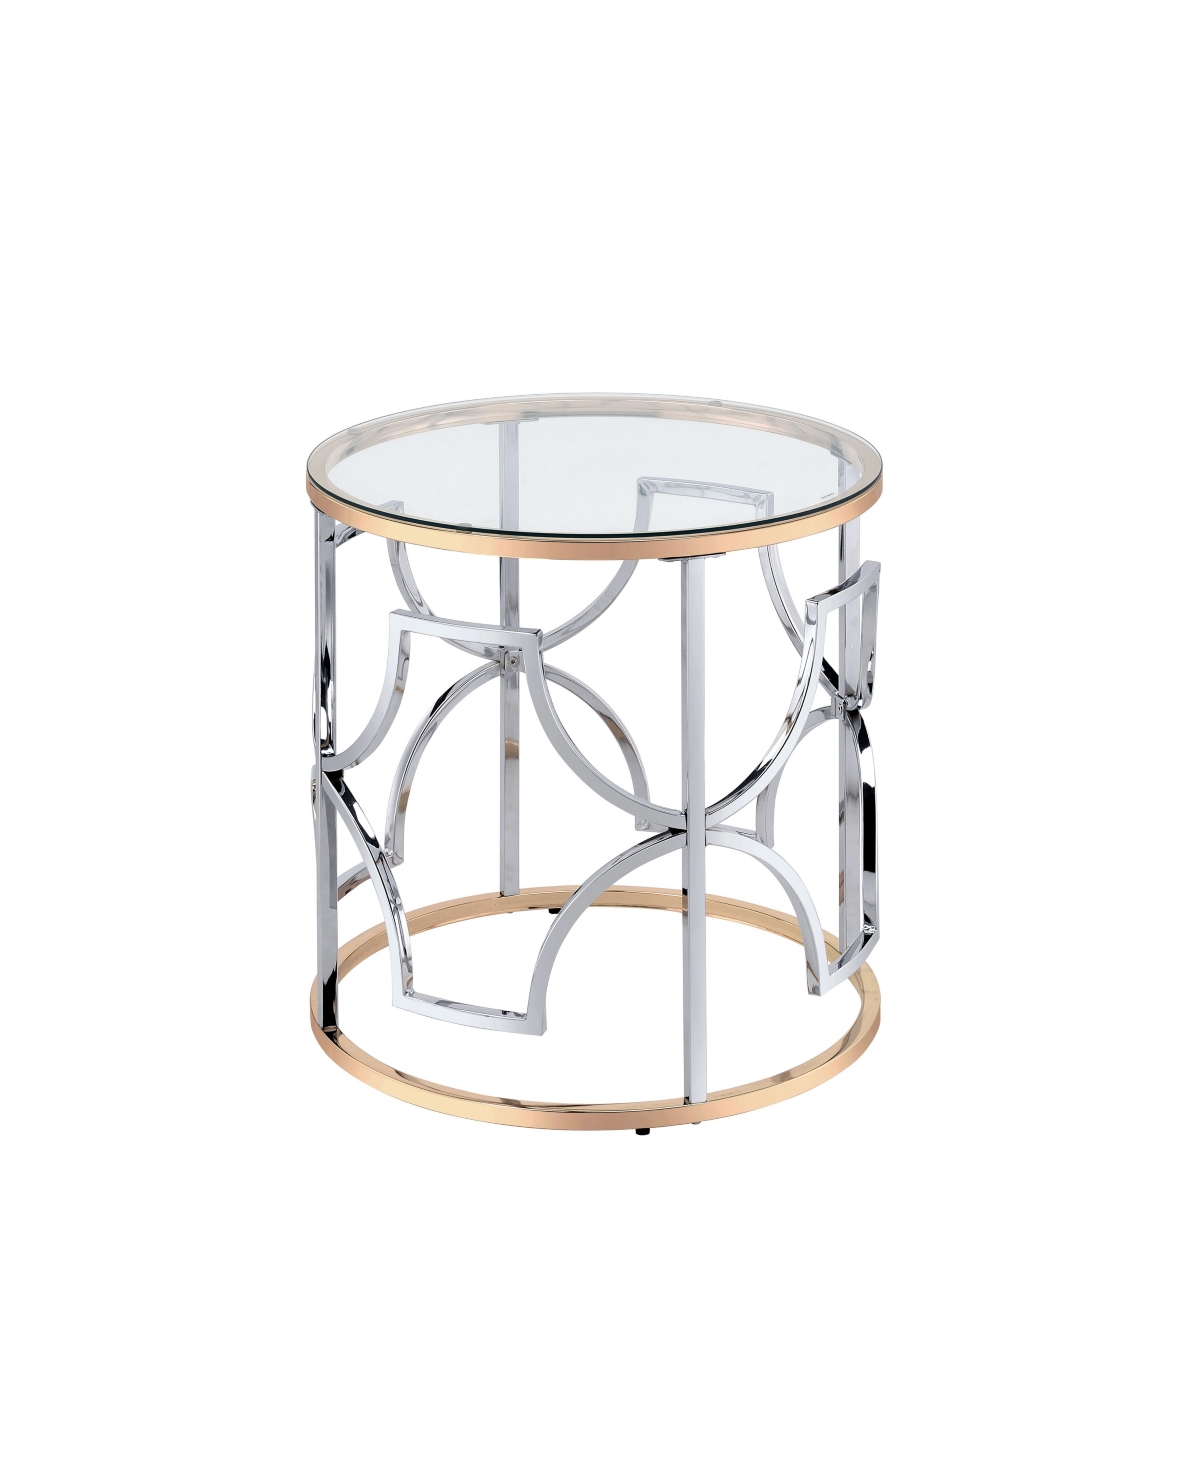 Furniture Of America 23" Metal, Glass Camille Modern Round Glass Top End Table In Chrome And Gold